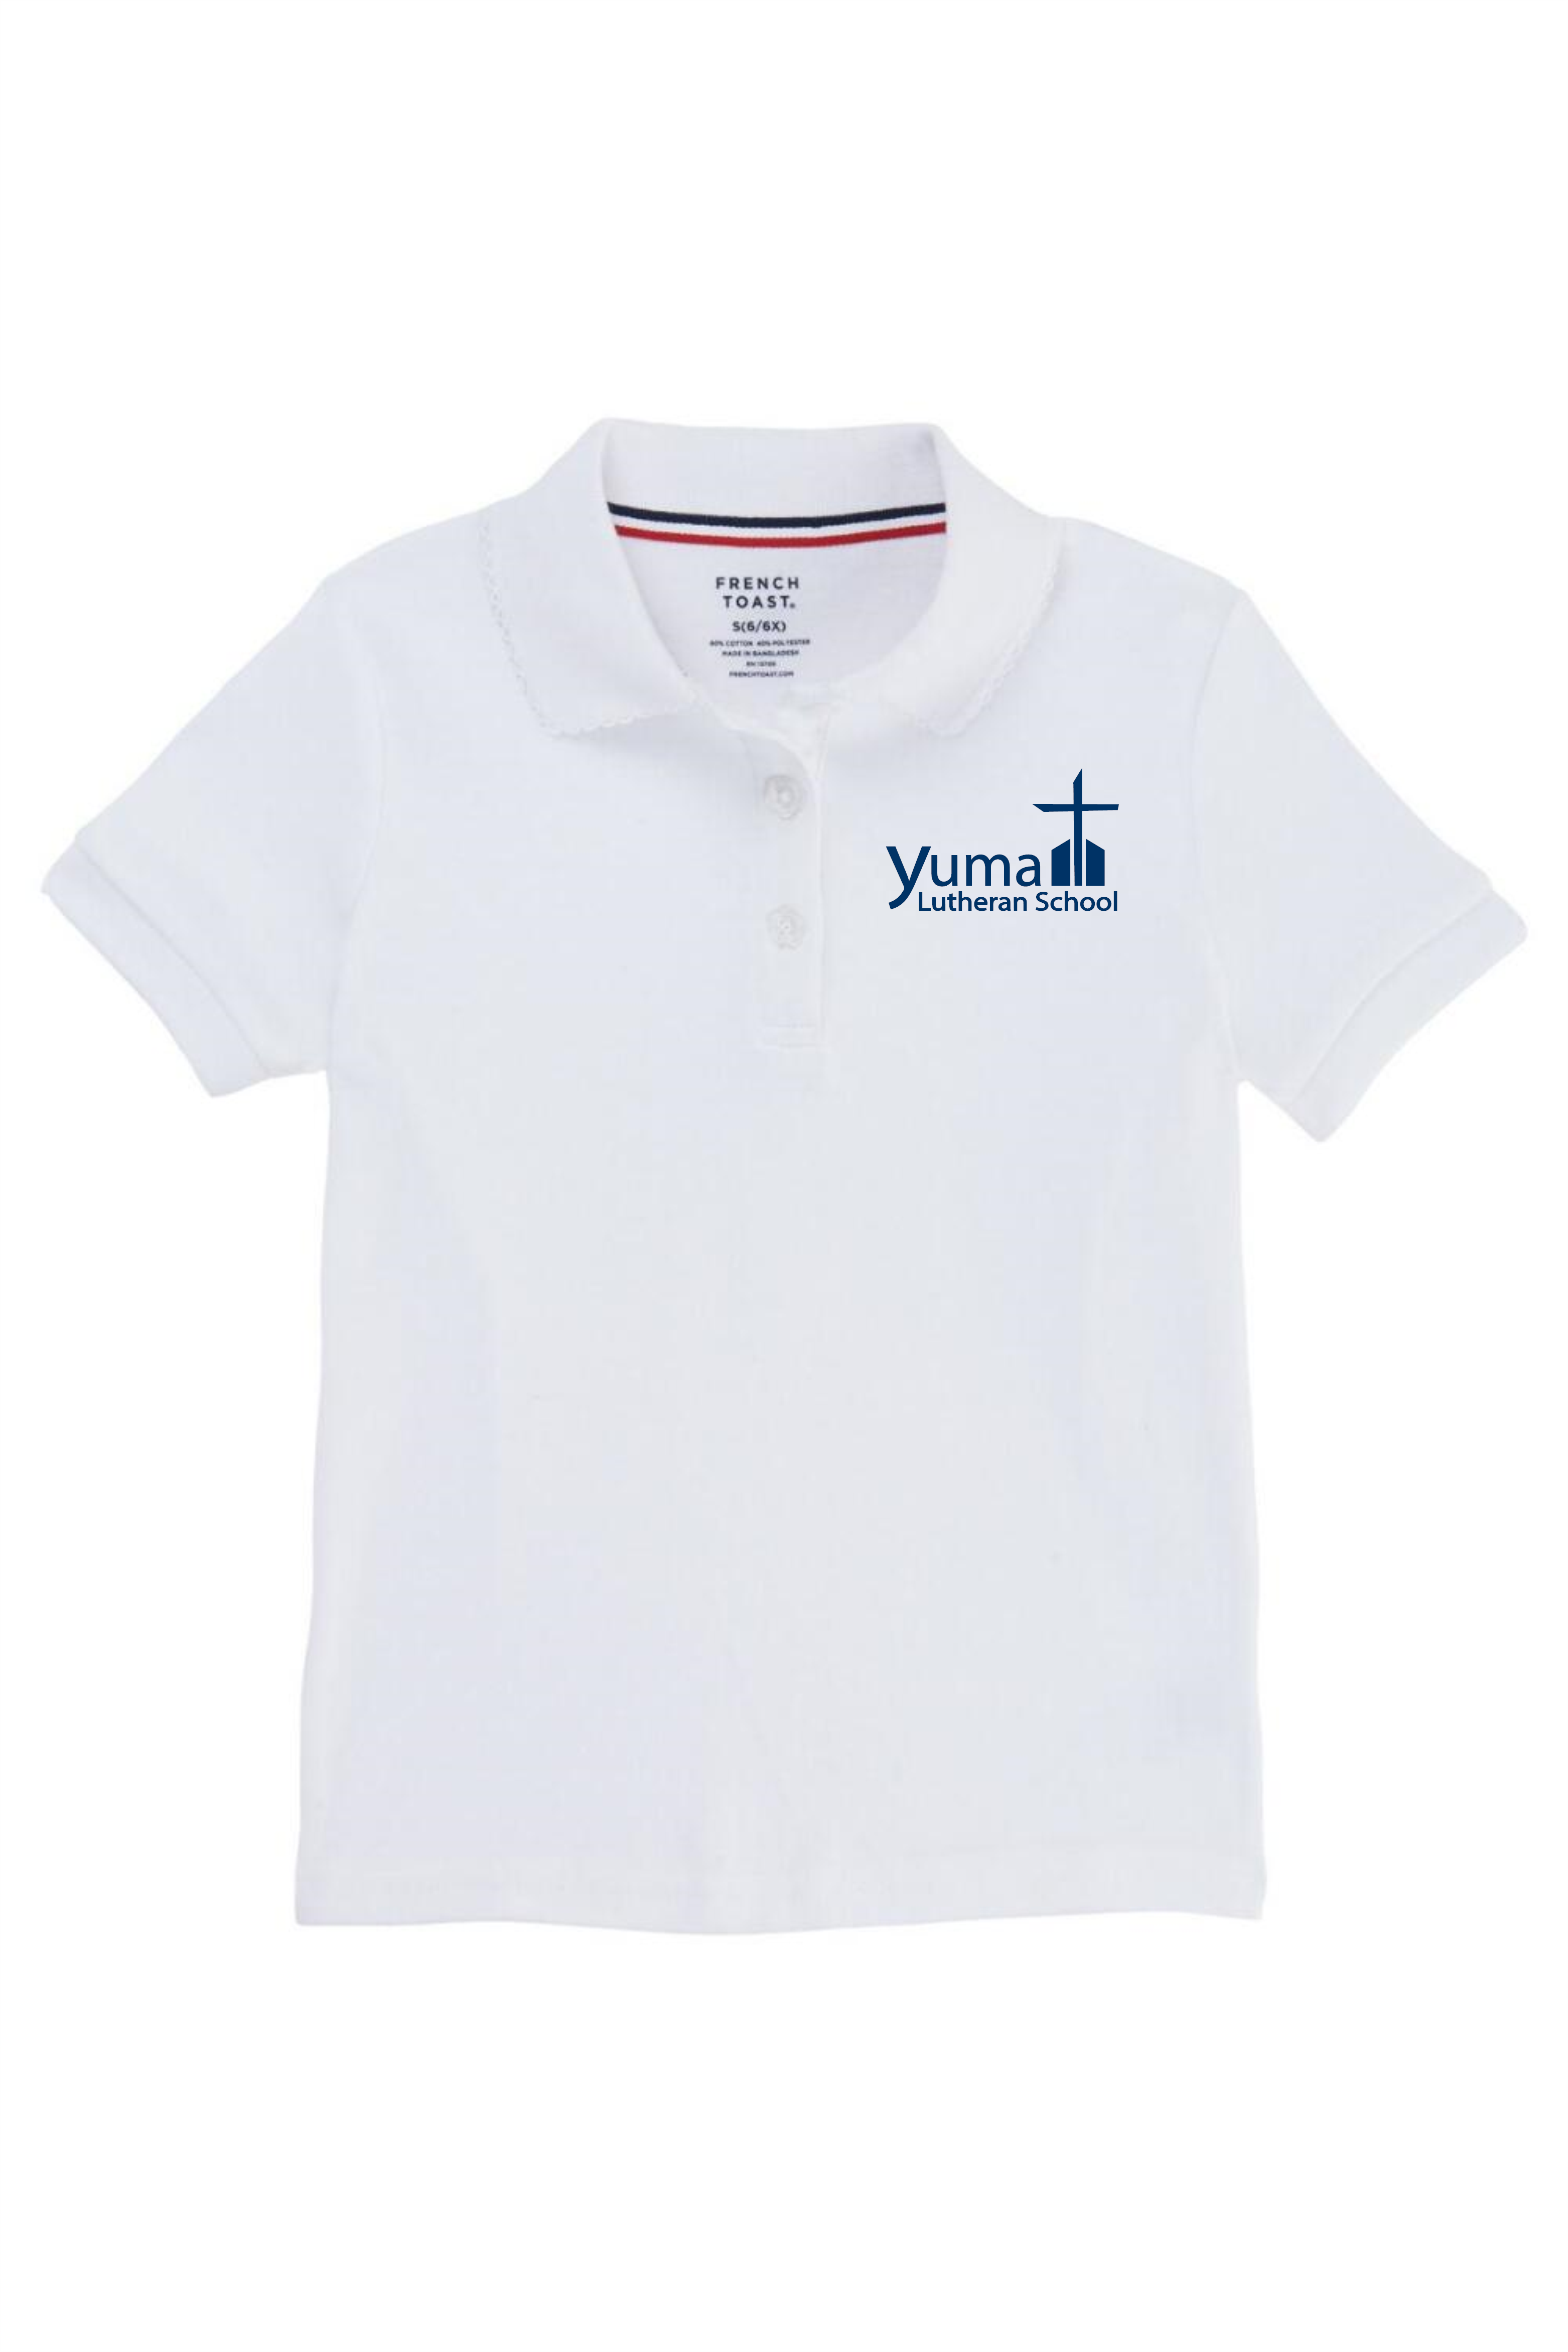 French Toast Girl's Cotton Short Sleeve Polo - YLS (Polo Size: SM - 6/6X, French Toast Polo Color: White)